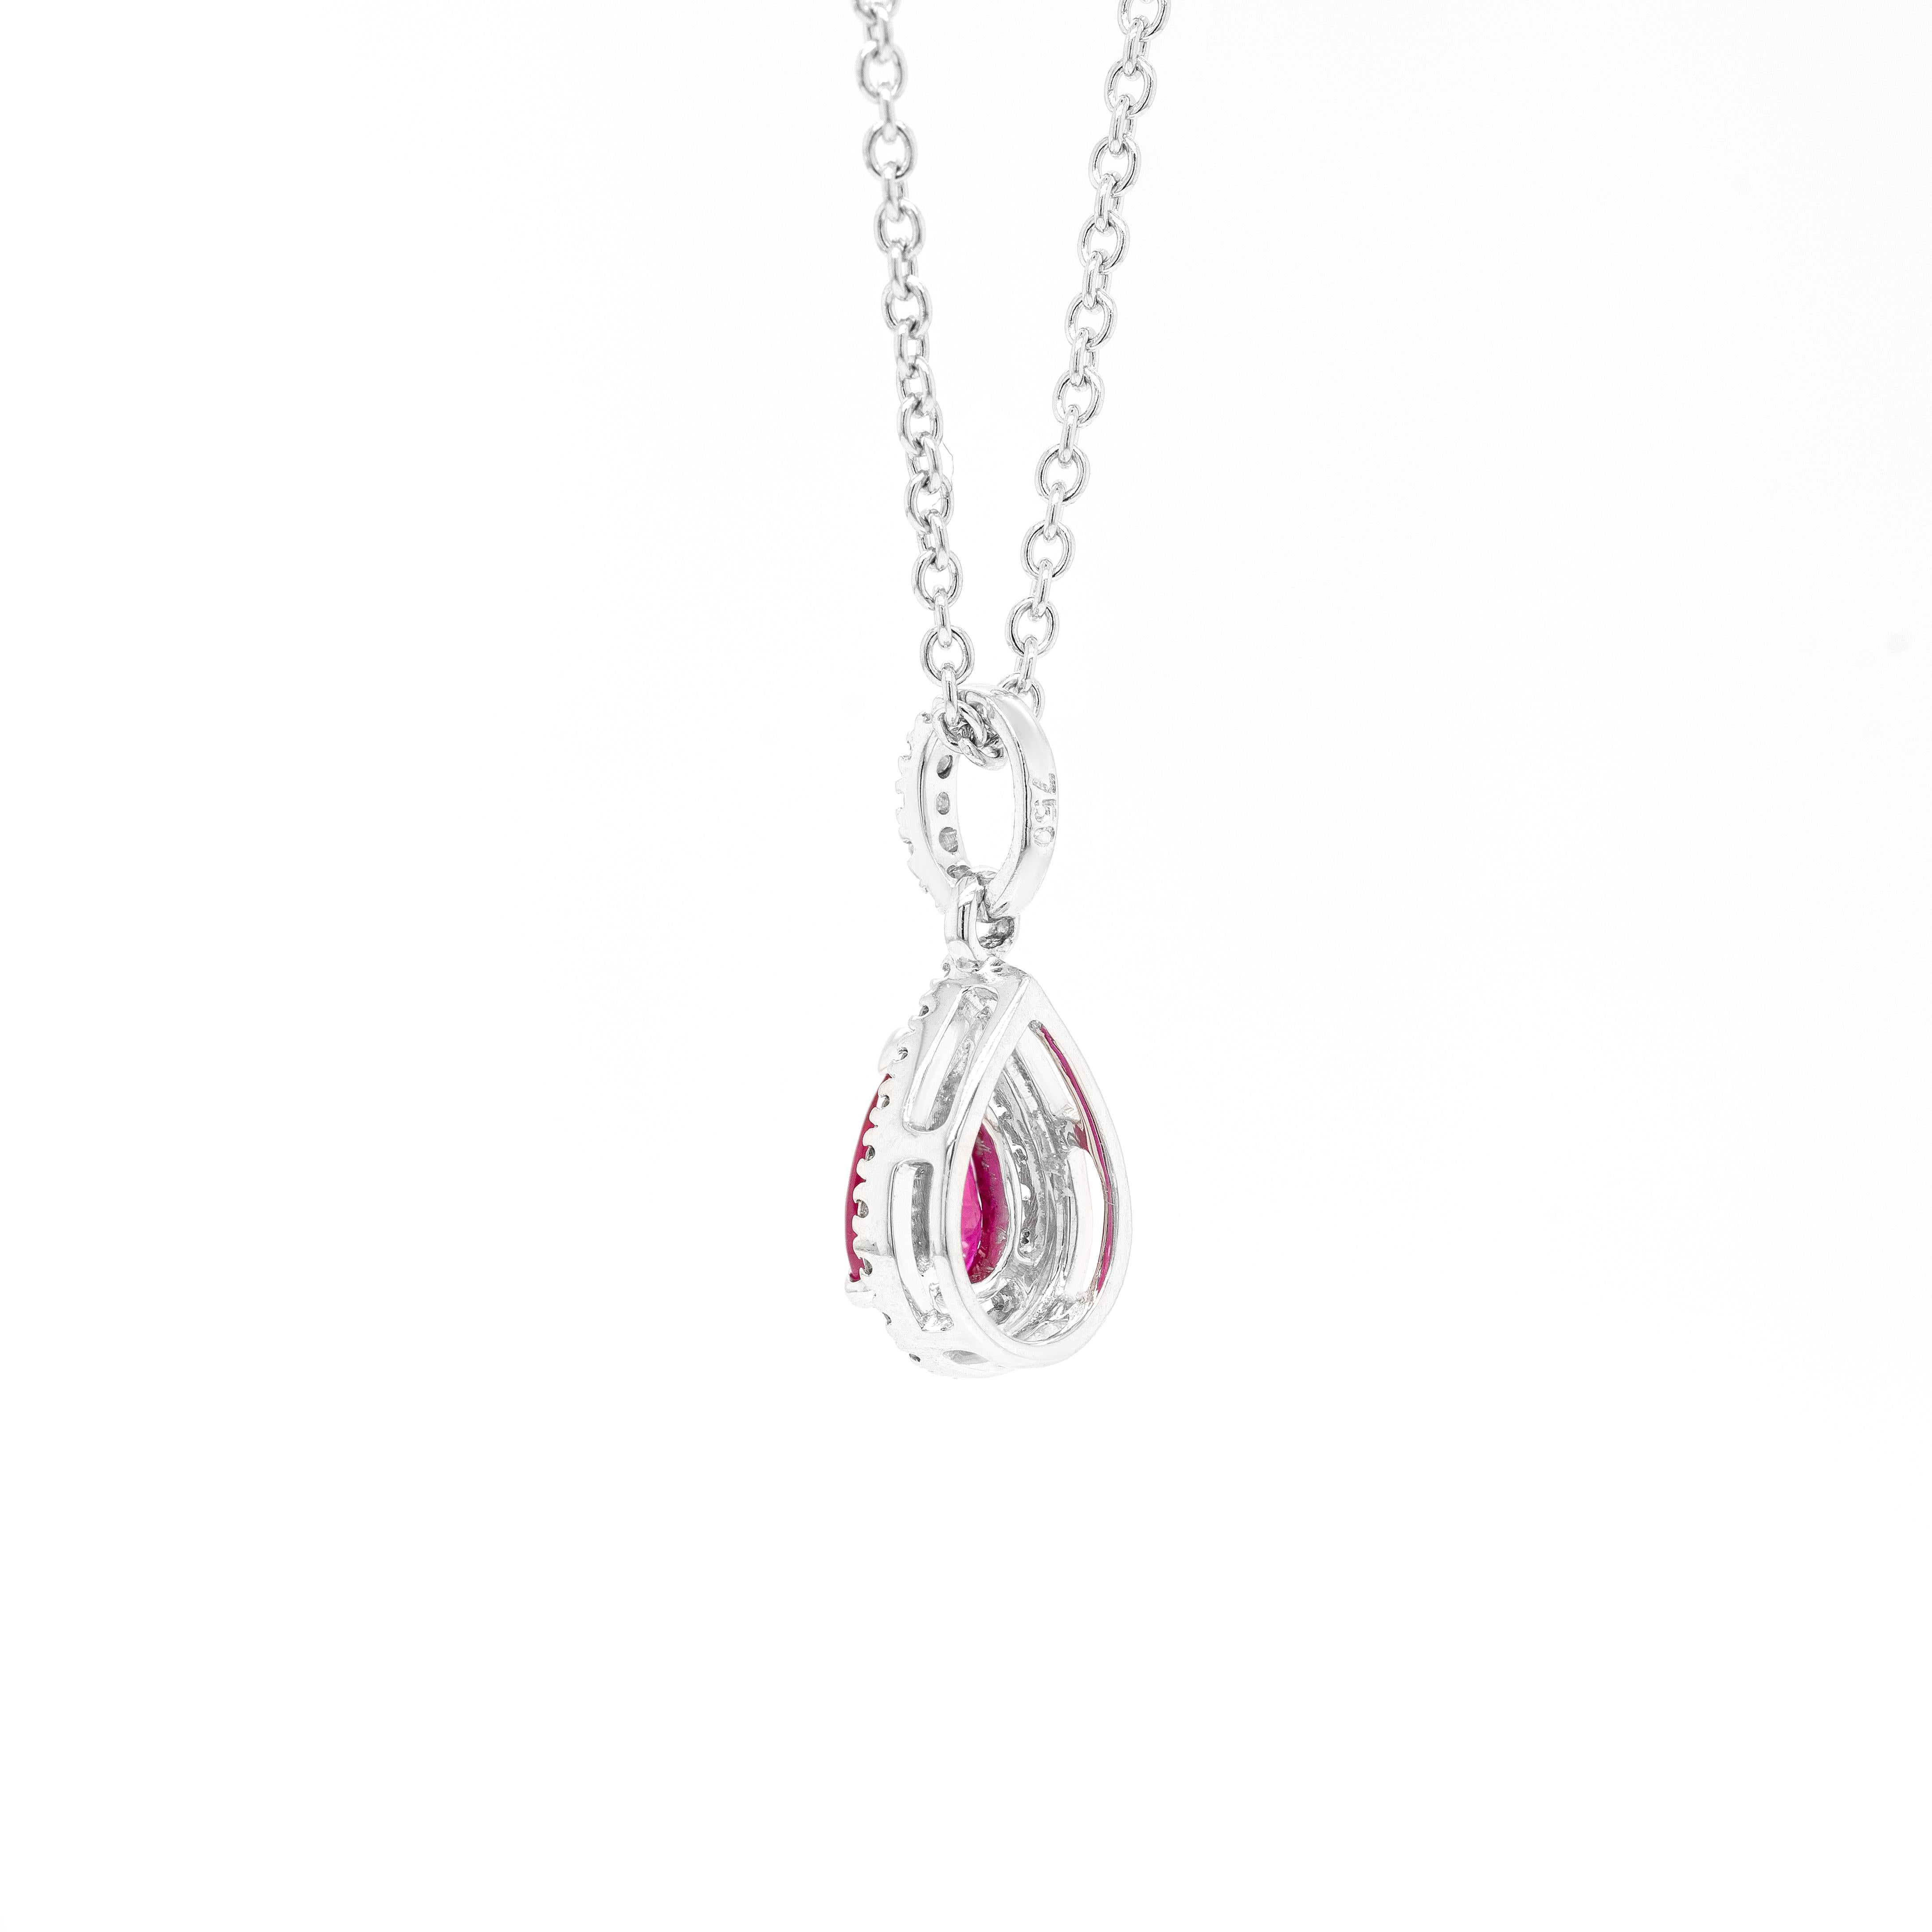 This exquisite 18 carat white gold pendant features a wonderful lively red pear shaped ruby weighing 0.45ct, mounted in a three claw, open back setting. The pendant is further designed with a halo set with 19 round brilliant cut diamonds surrounding